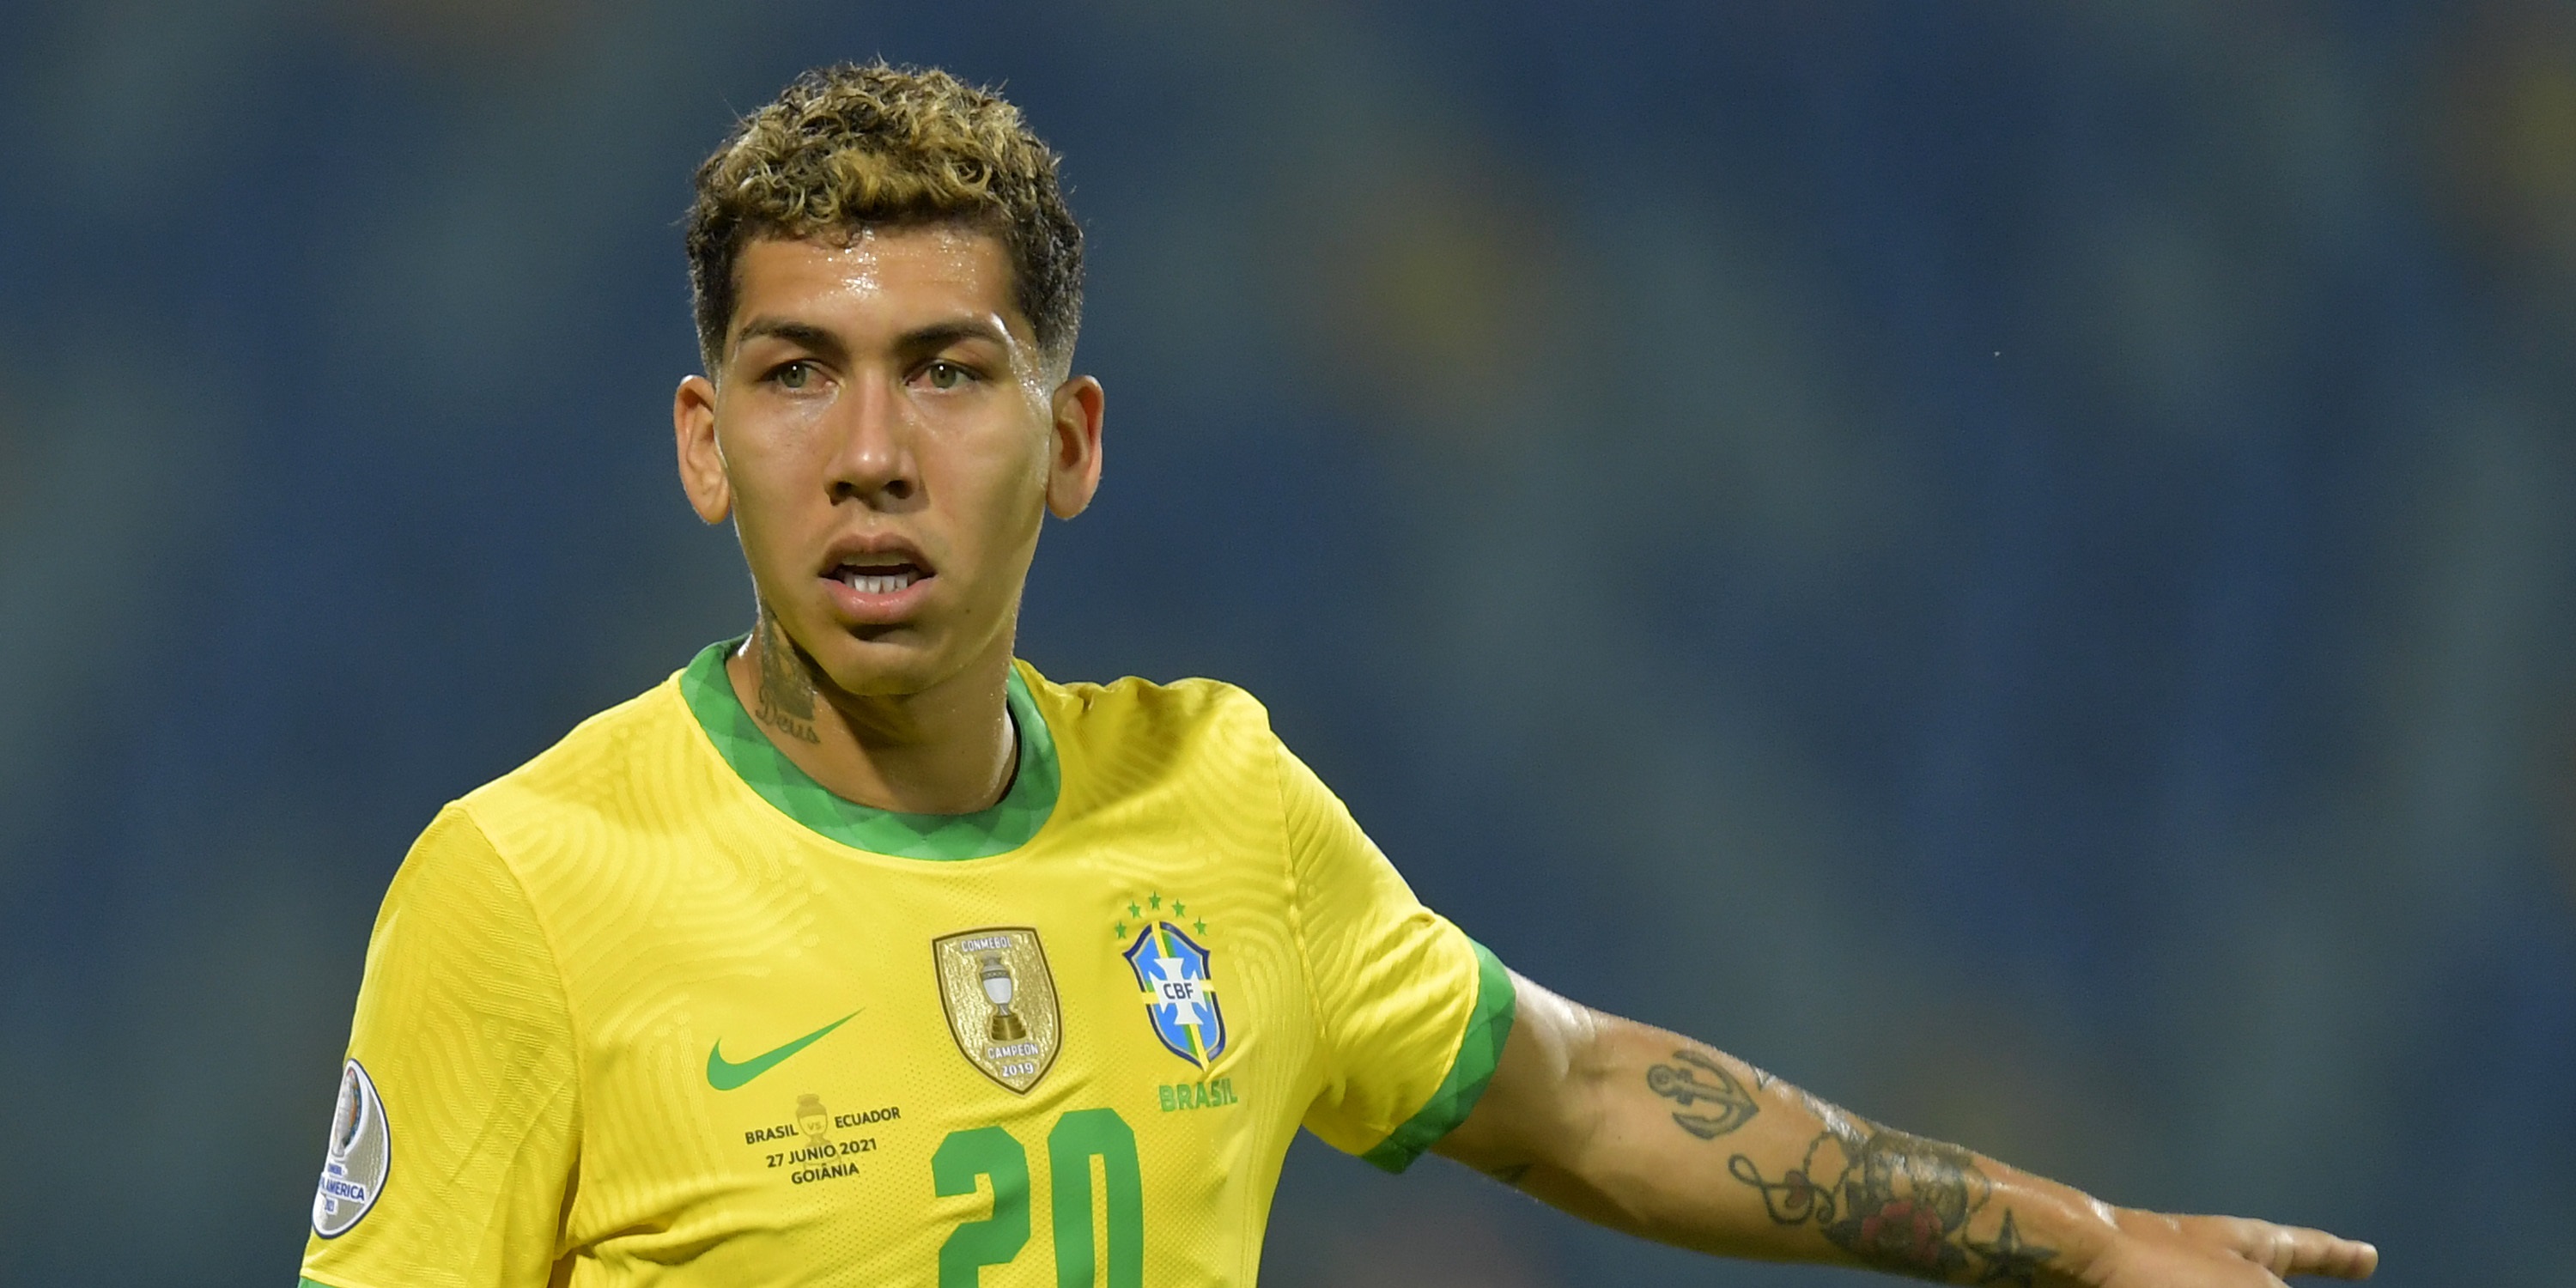 (Image) Sky graphic compares Firmino to Brazilian PL forwards – decision to omit LFC man from World Cup makes no sense